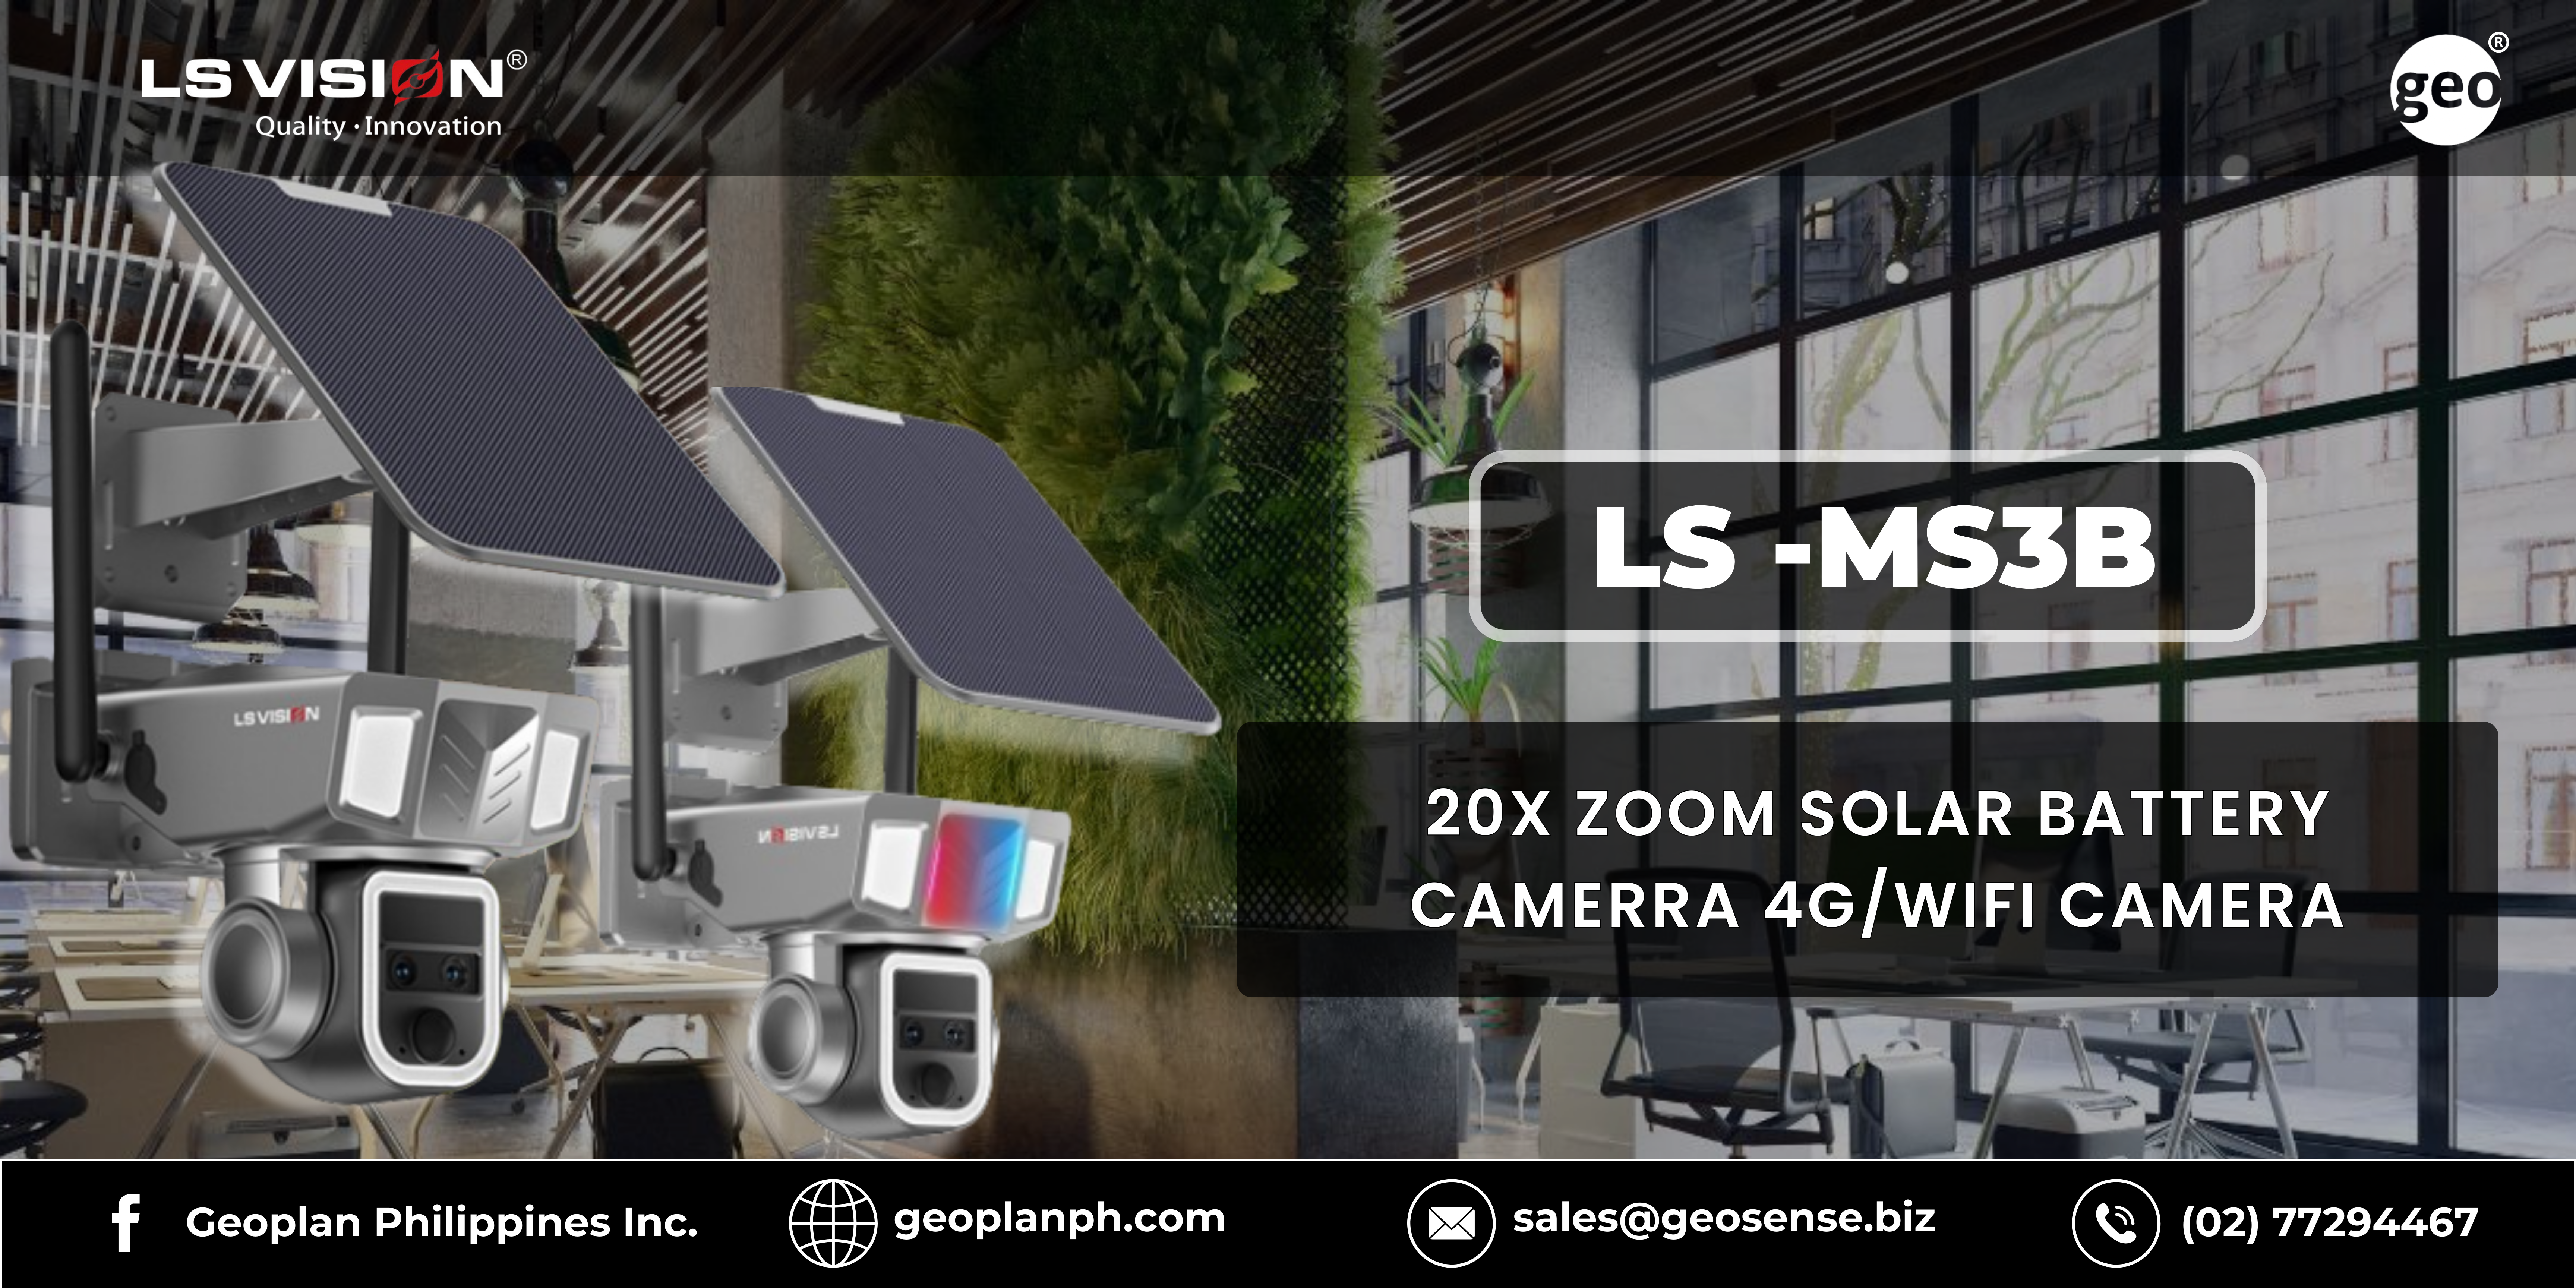 LS VISION: Power Up Your Protection with the LS -MS3B Solar 20x Zoom Security Camera 4G/WIFI